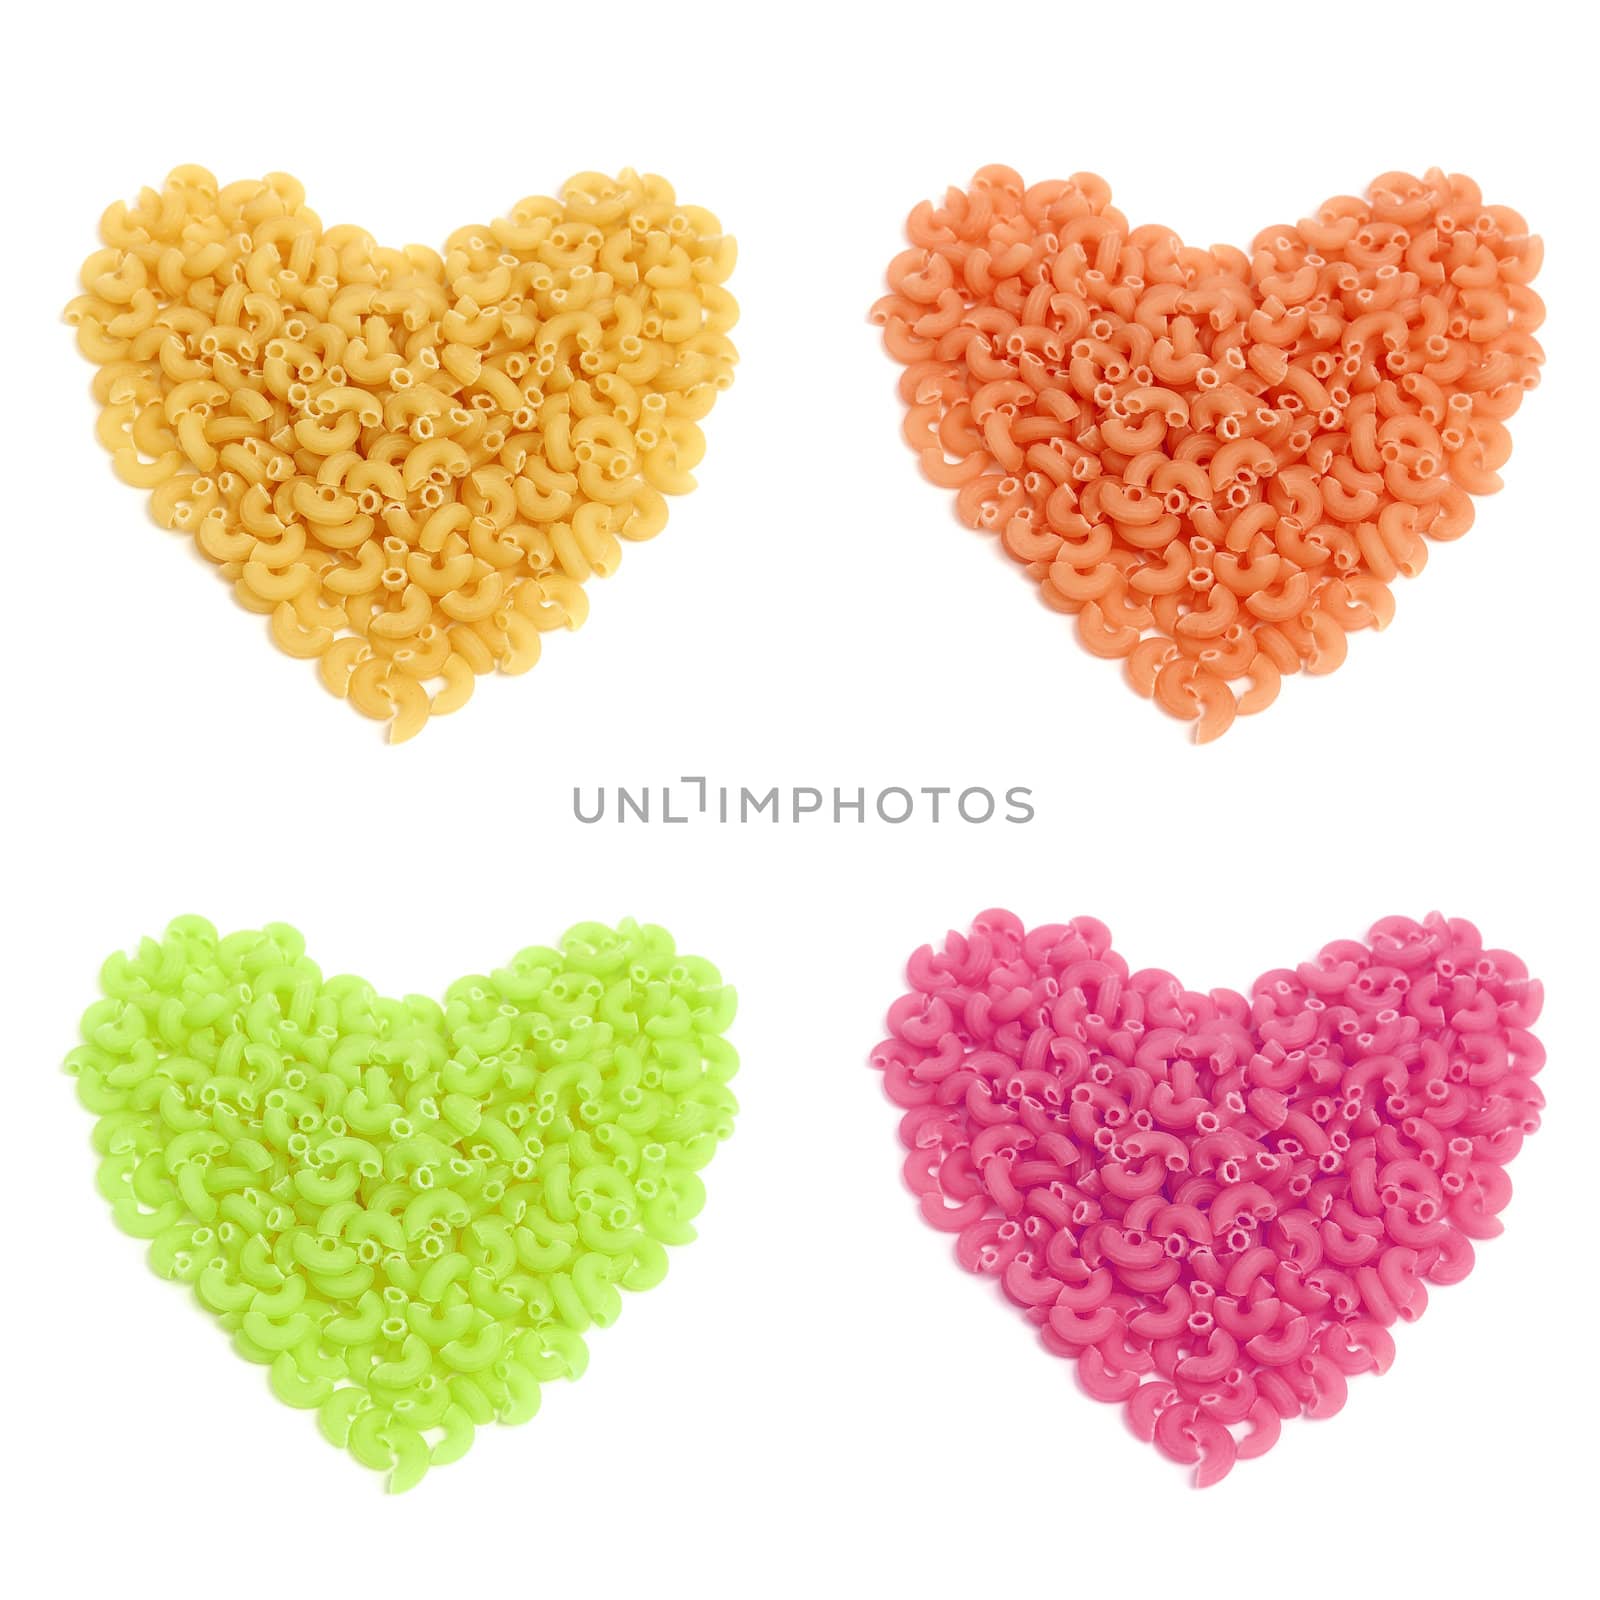 Colorful macaroni in heart shape isolated on white background 